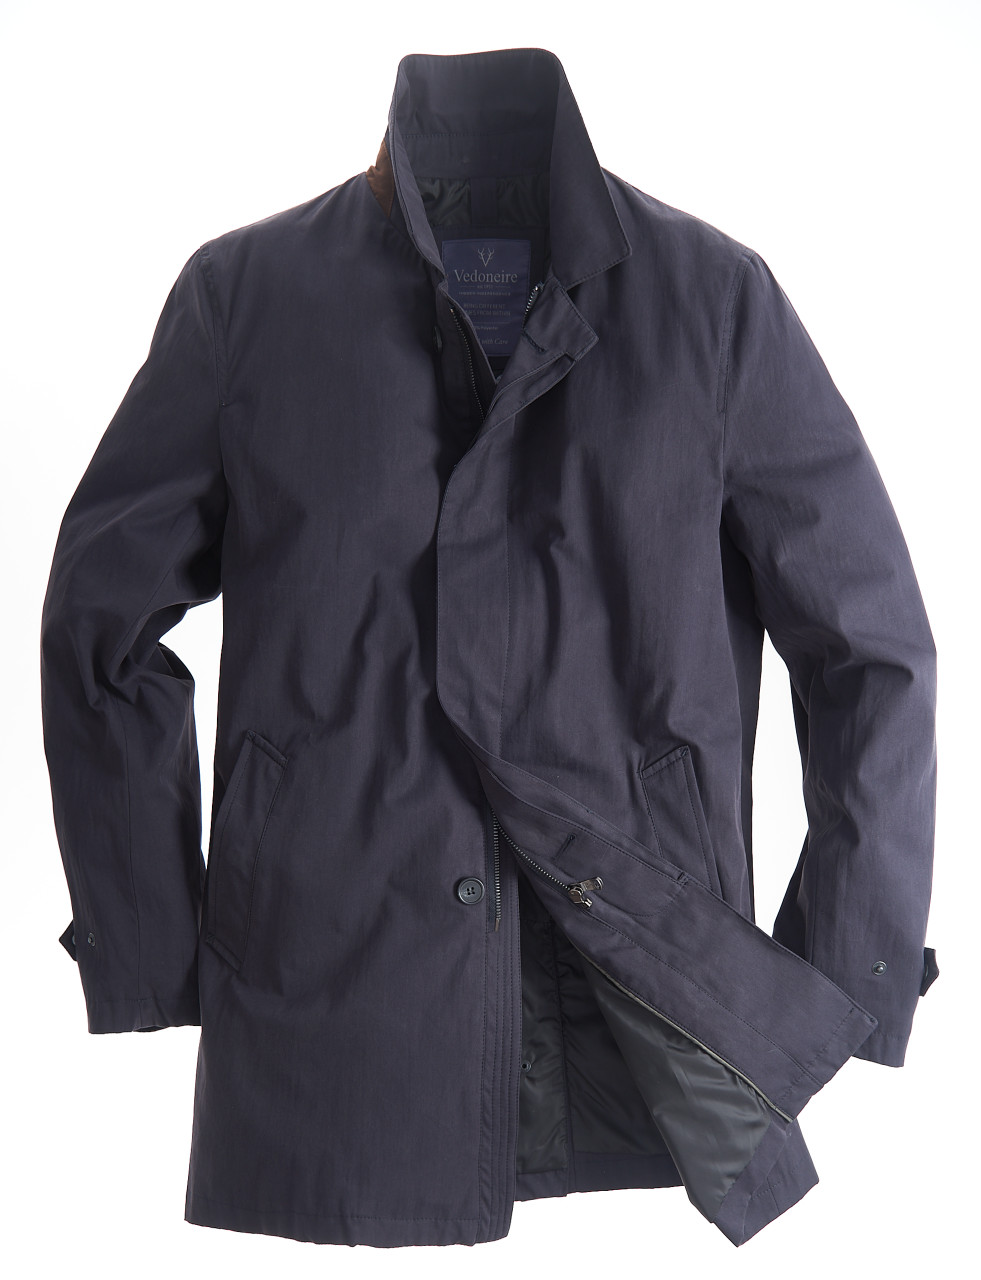 Mens Classic Rain Mac Jackdet in Navy by Vedoneire of Ireland